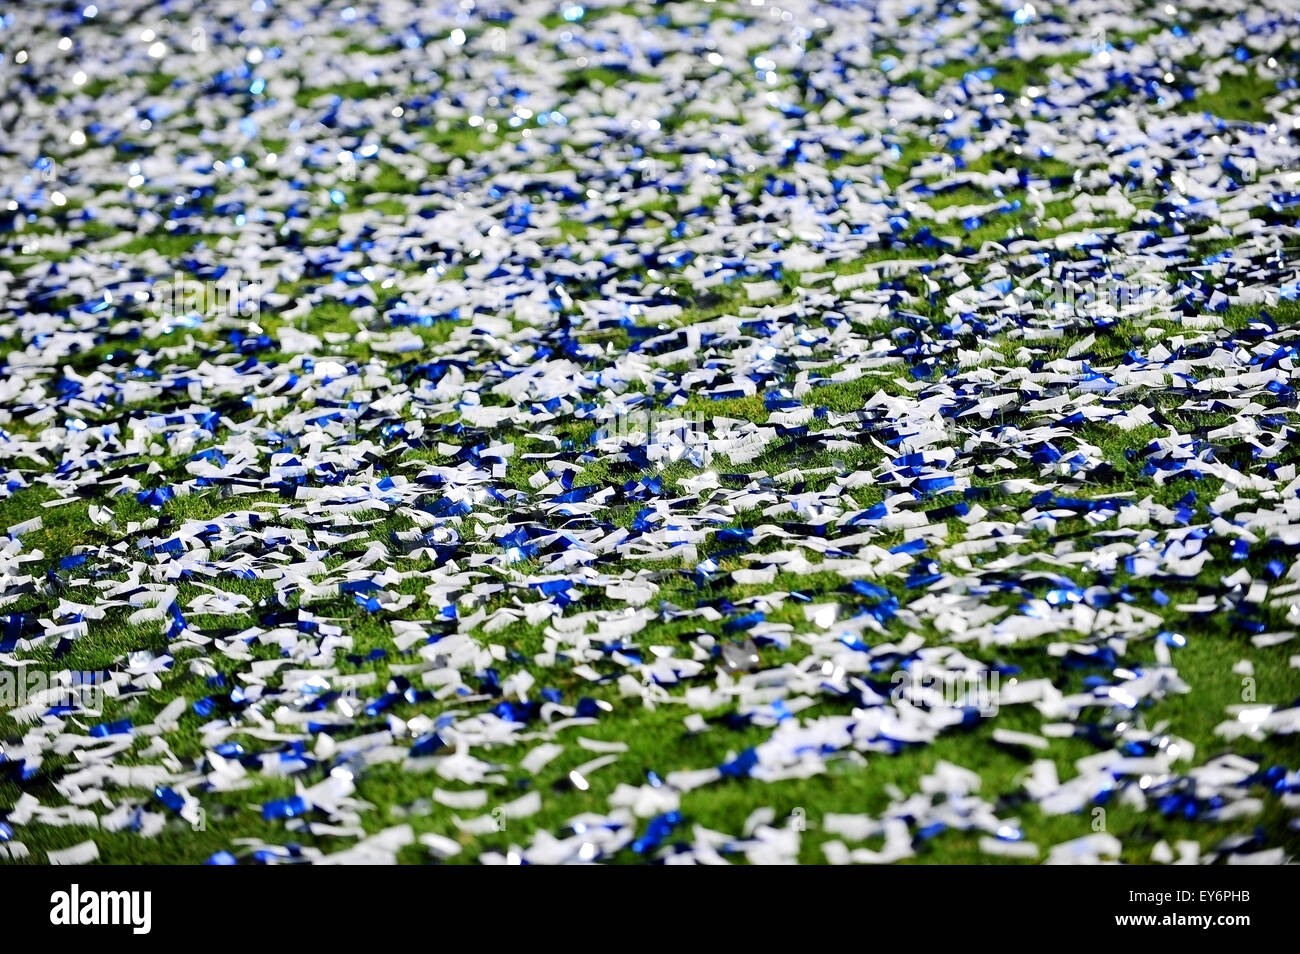 Lots of confetti on a turf soccer field after a celebration moment Stock Photo